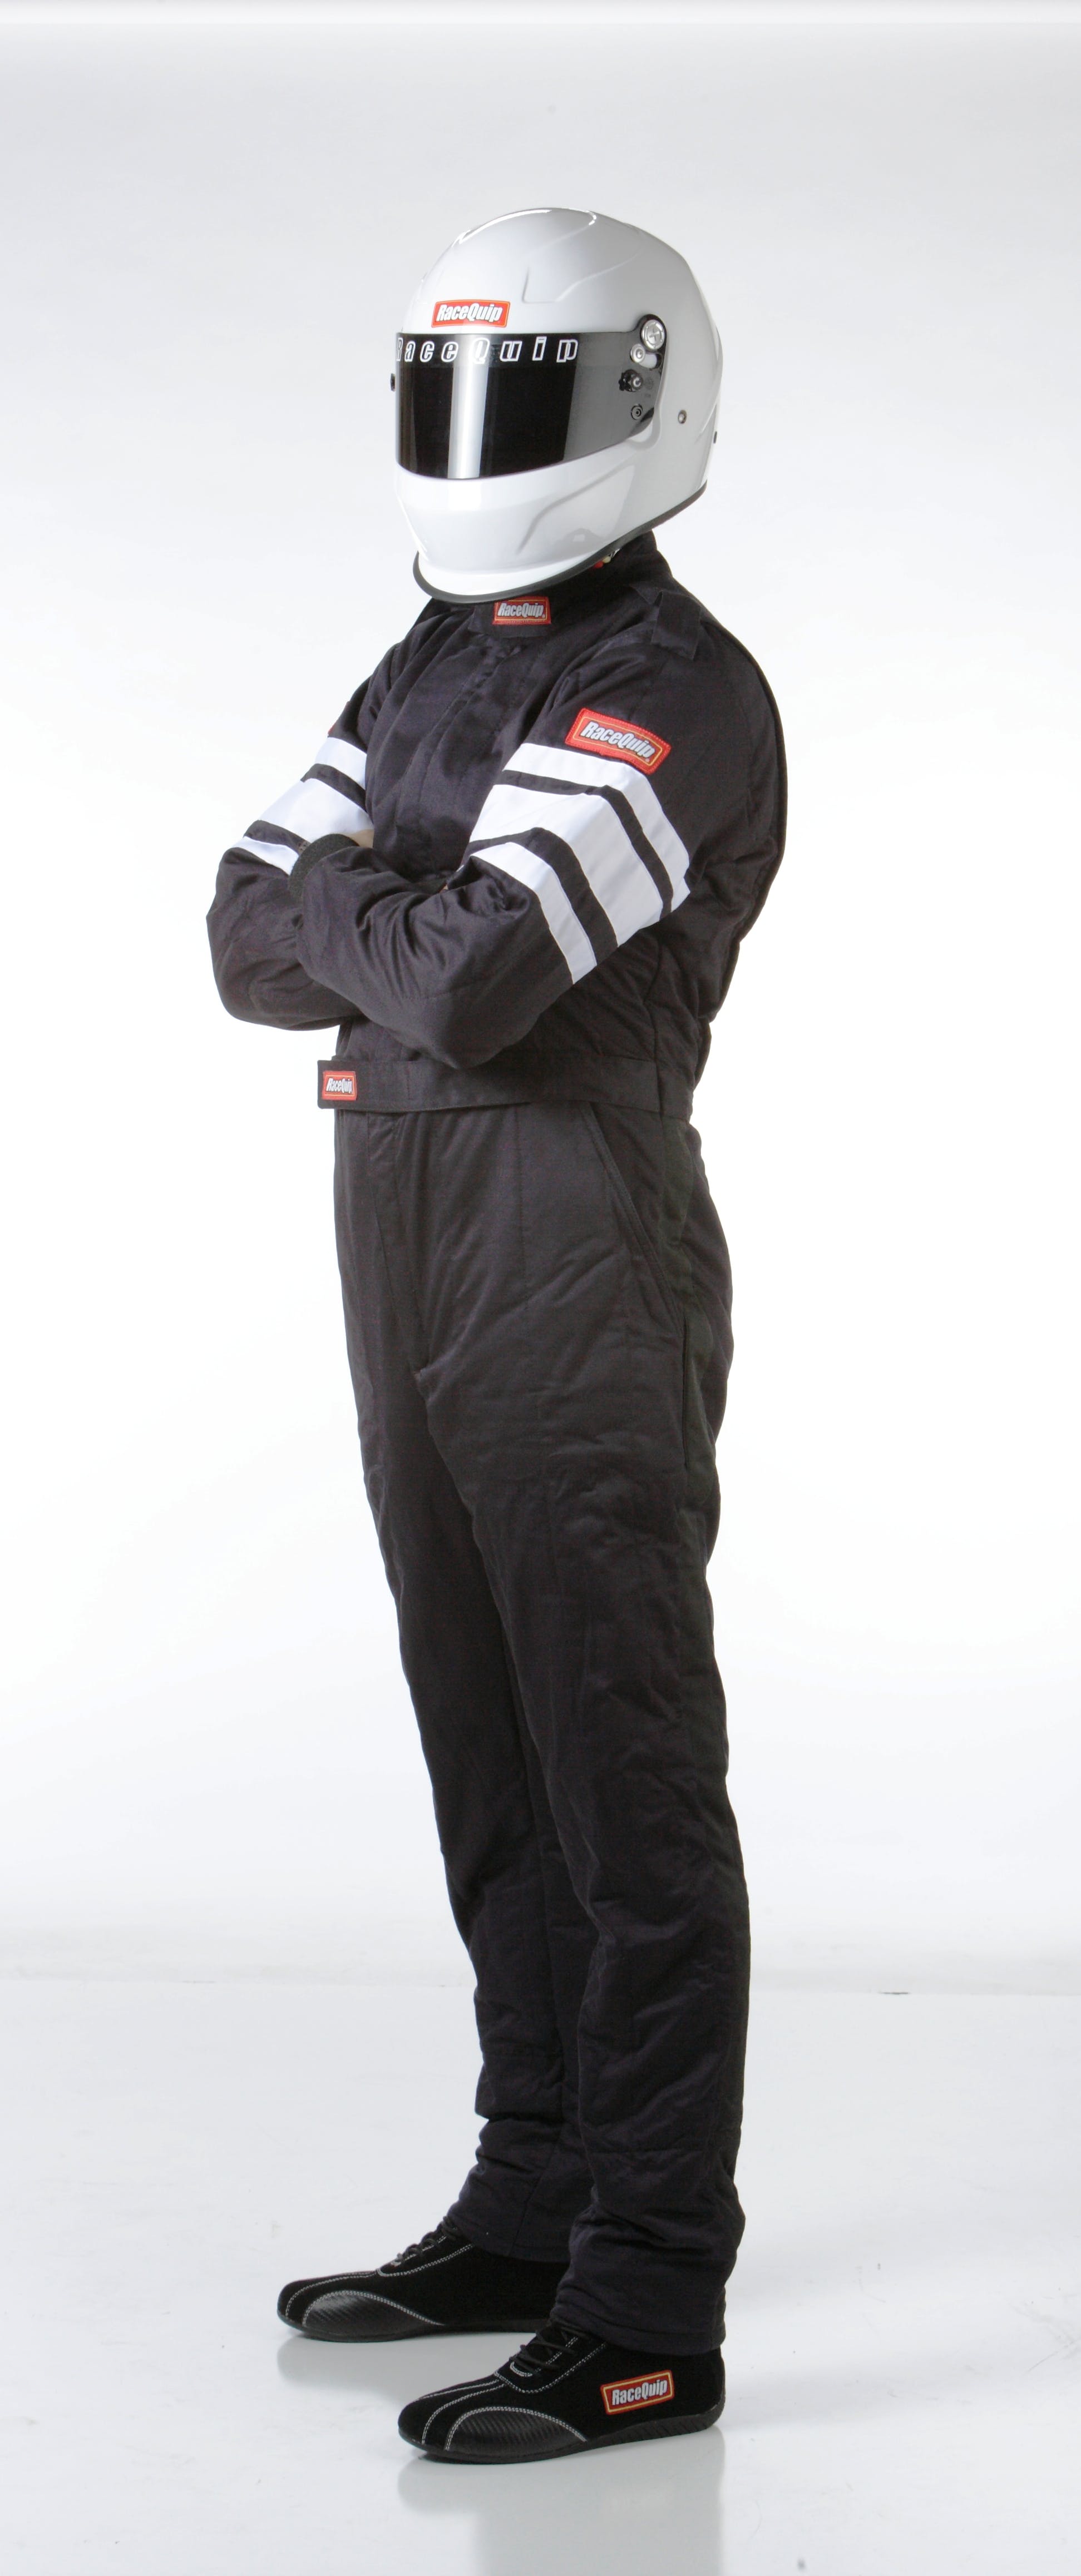 RaceQuip 120002 SFI-5 Pyrovatex One-Piece Multi-Layer Racing Fire Suit (Black, Small)